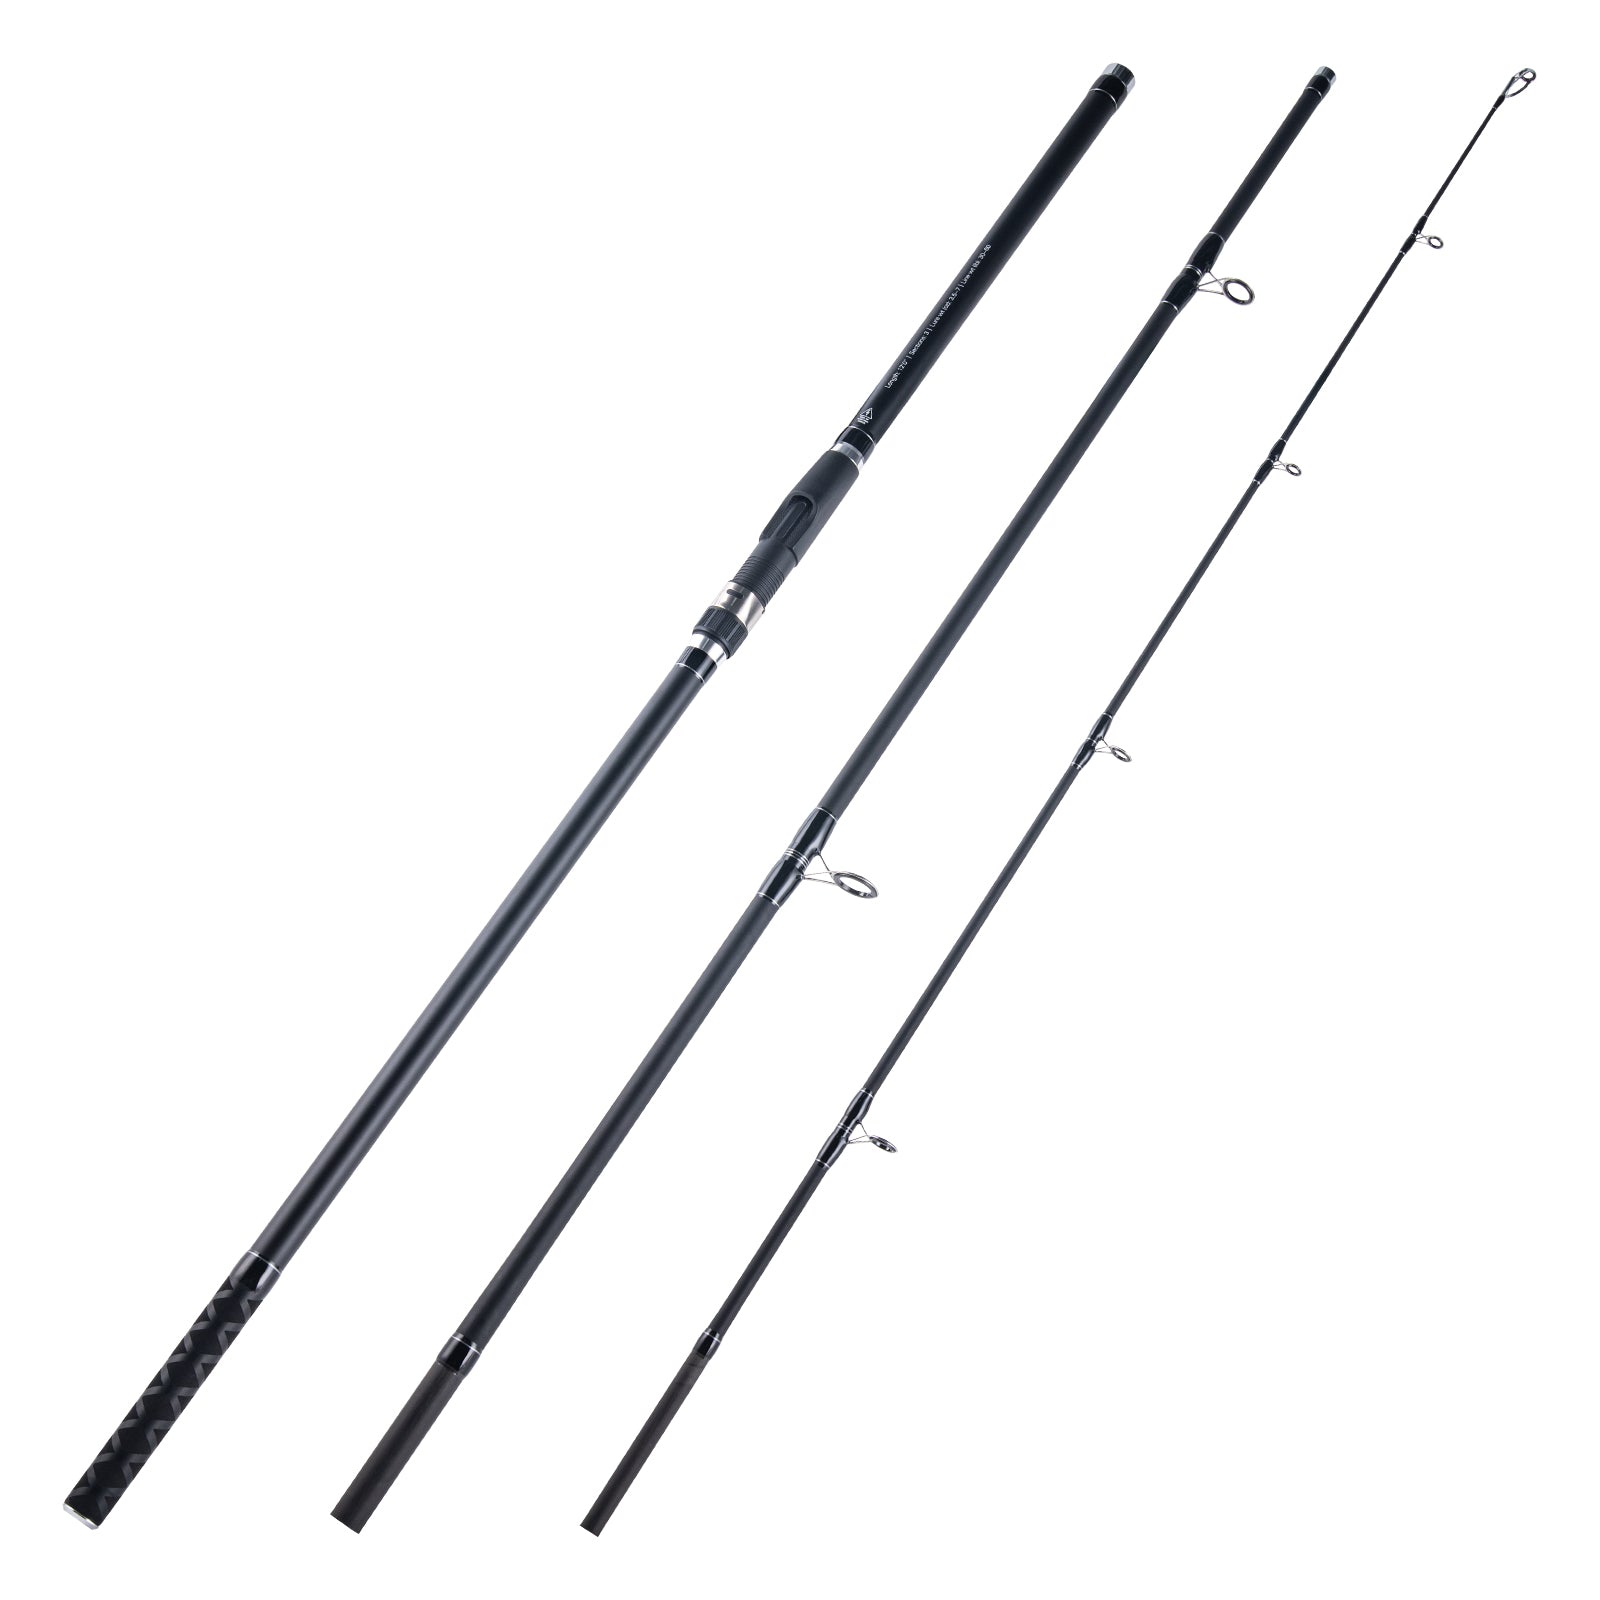 Buy Goture Portable Travel Fishing Rod - 3 Piece 24T Carbon Spinning Rod  with Cork Grip Handle, Lightweight Bass Fishing Pole for Freshwater &  Saltwater(6-10 Foot M Power) Online at Low Prices